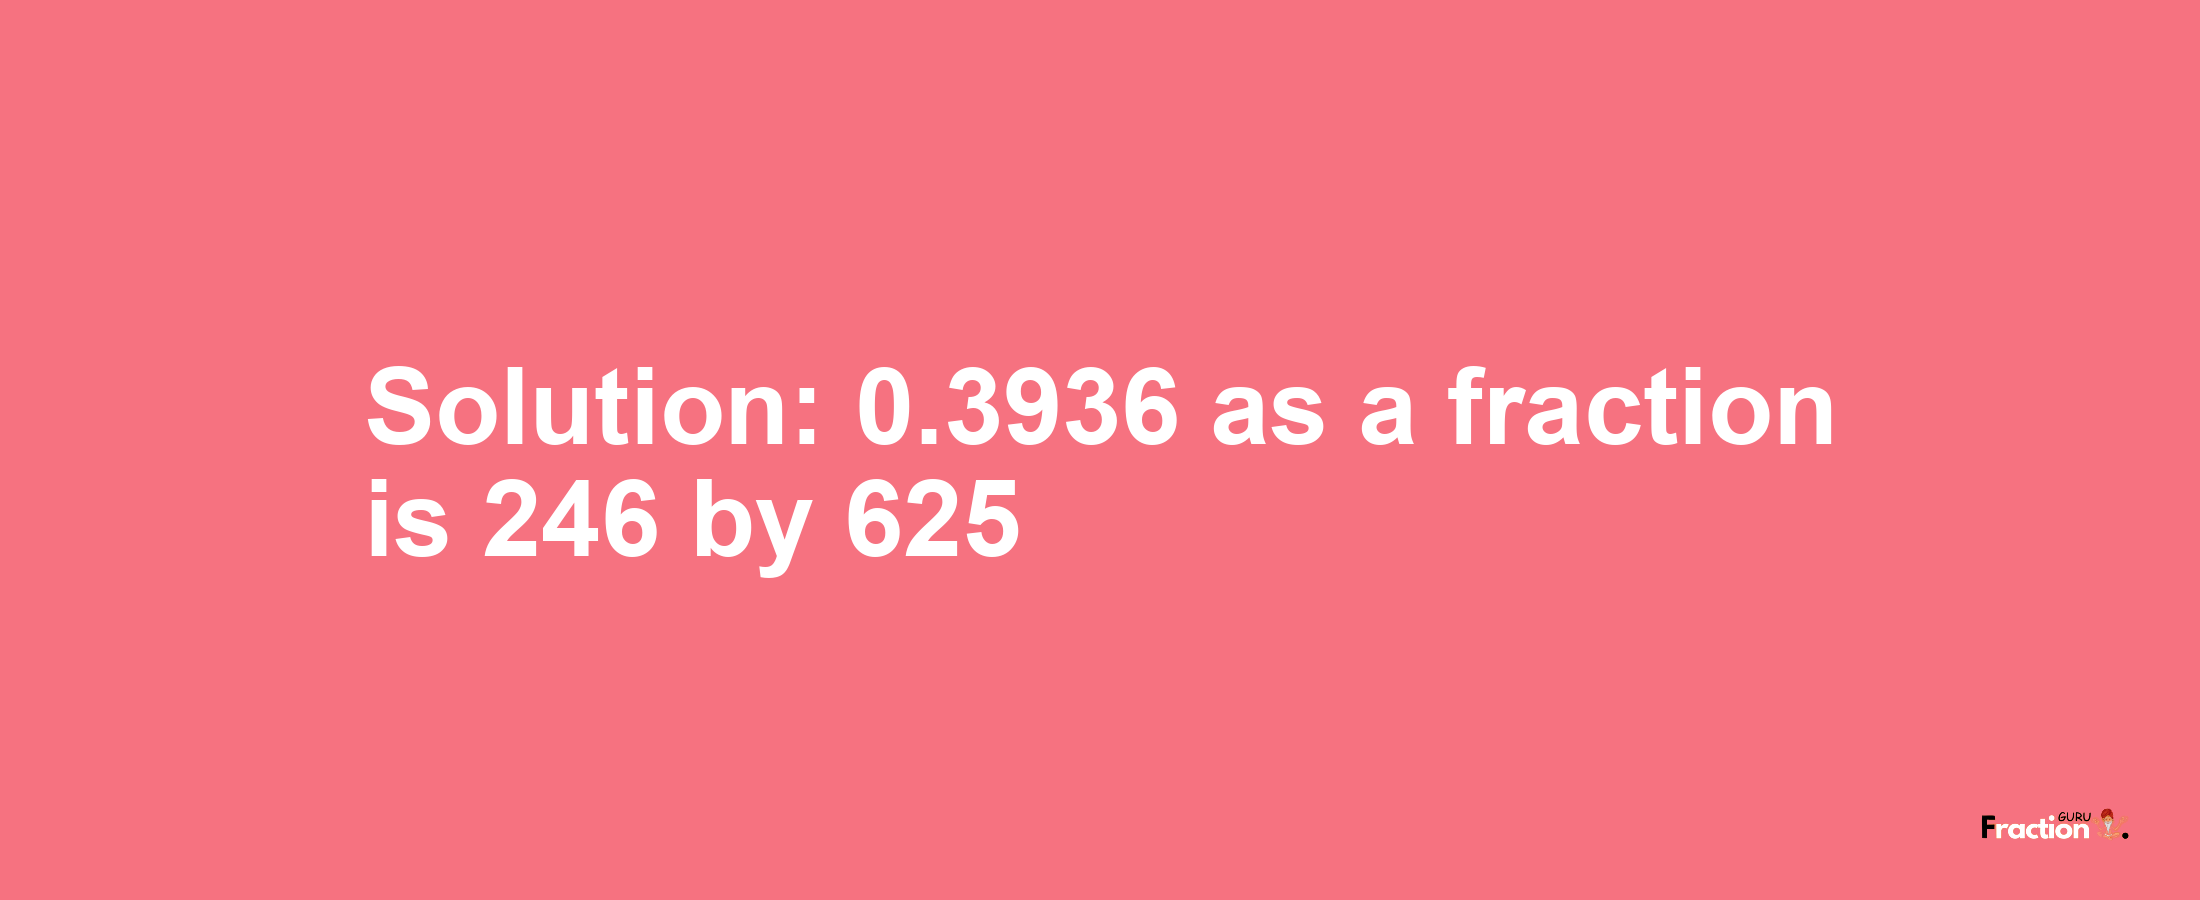 Solution:0.3936 as a fraction is 246/625